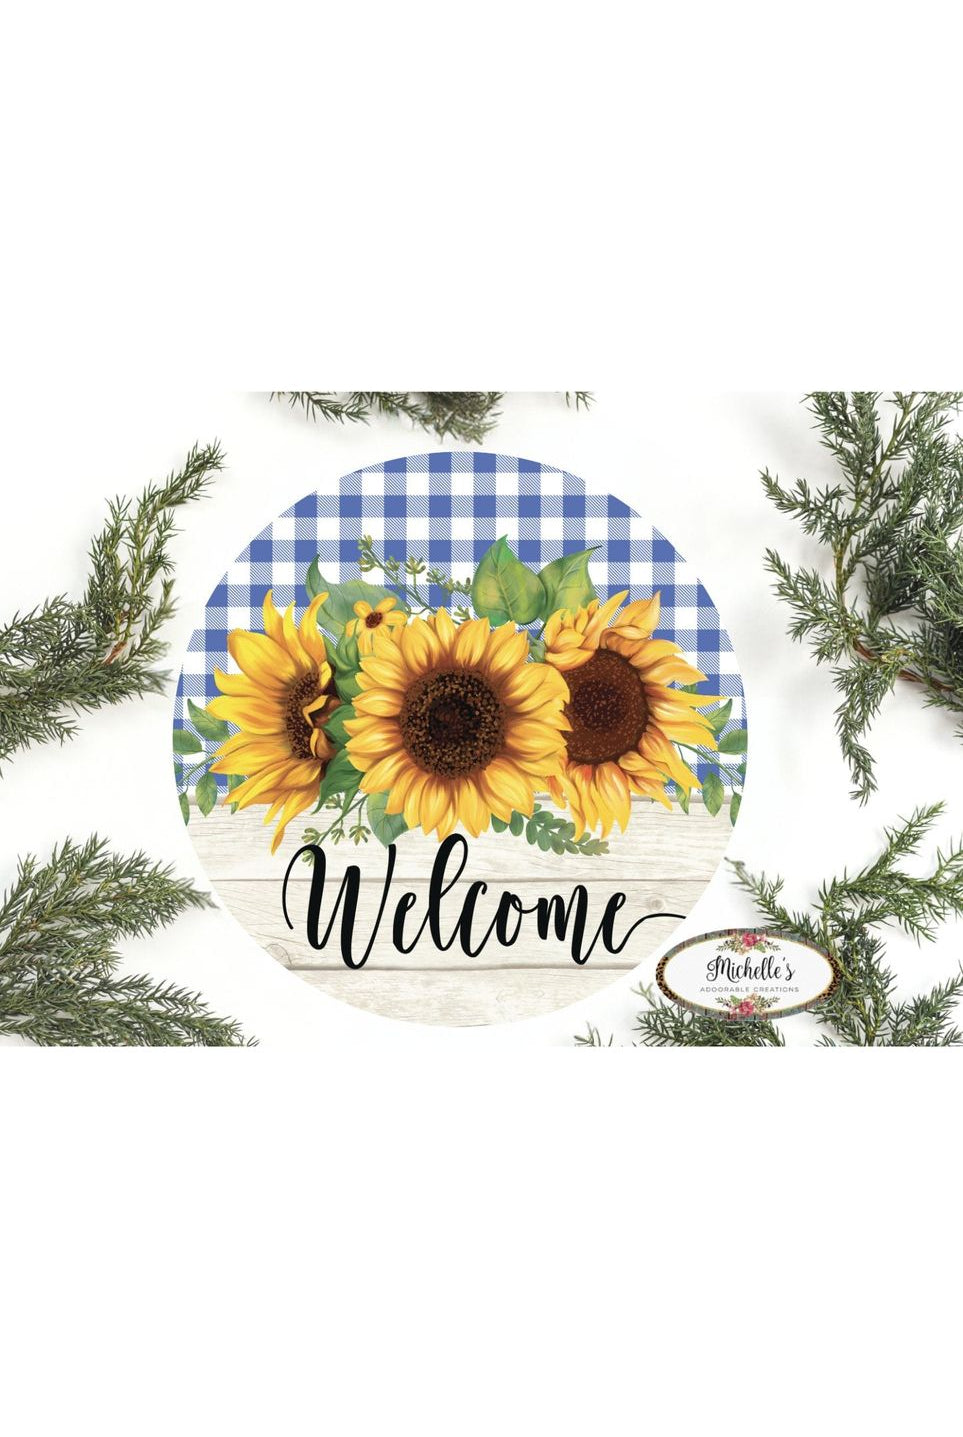 Shop For Sunflower Welcome Blue Plaid Round Sign - Wreath Enhancement